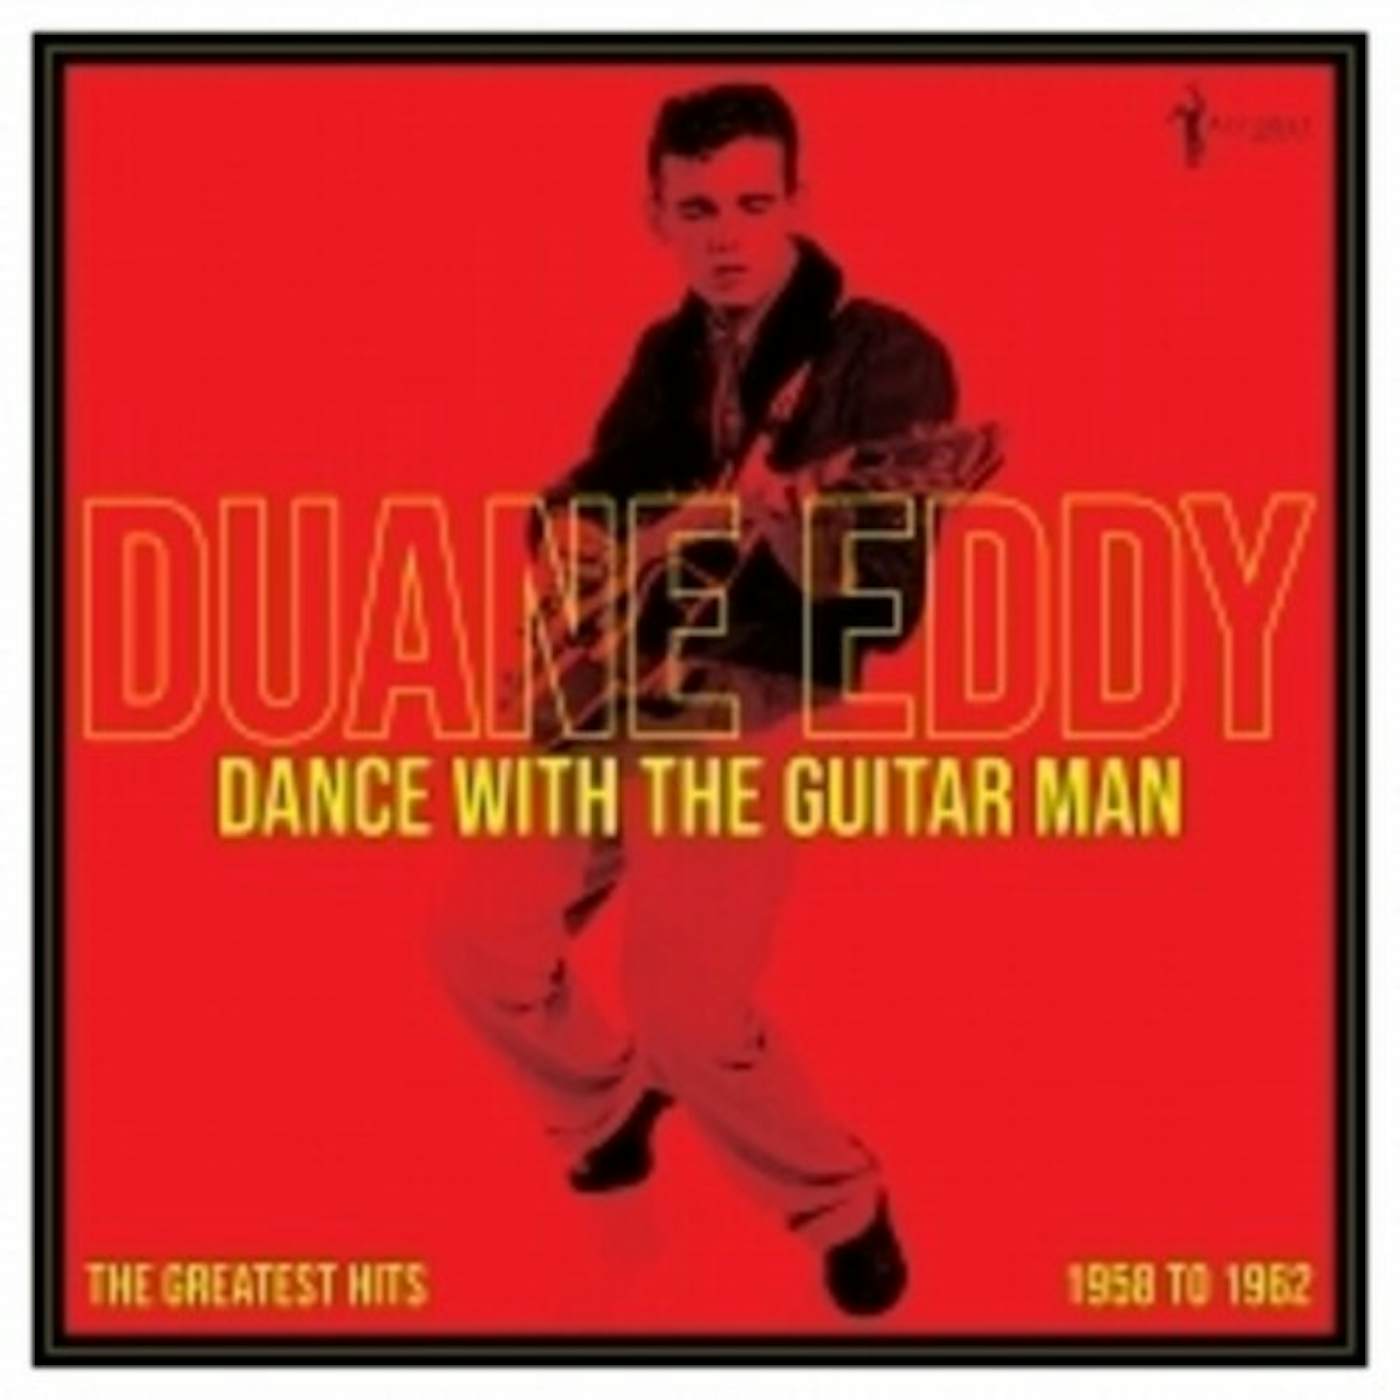 Eddy Duane DANCE WITH THE GUITAR MAN: GREATEST HITS 1958-62 Vinyl Record